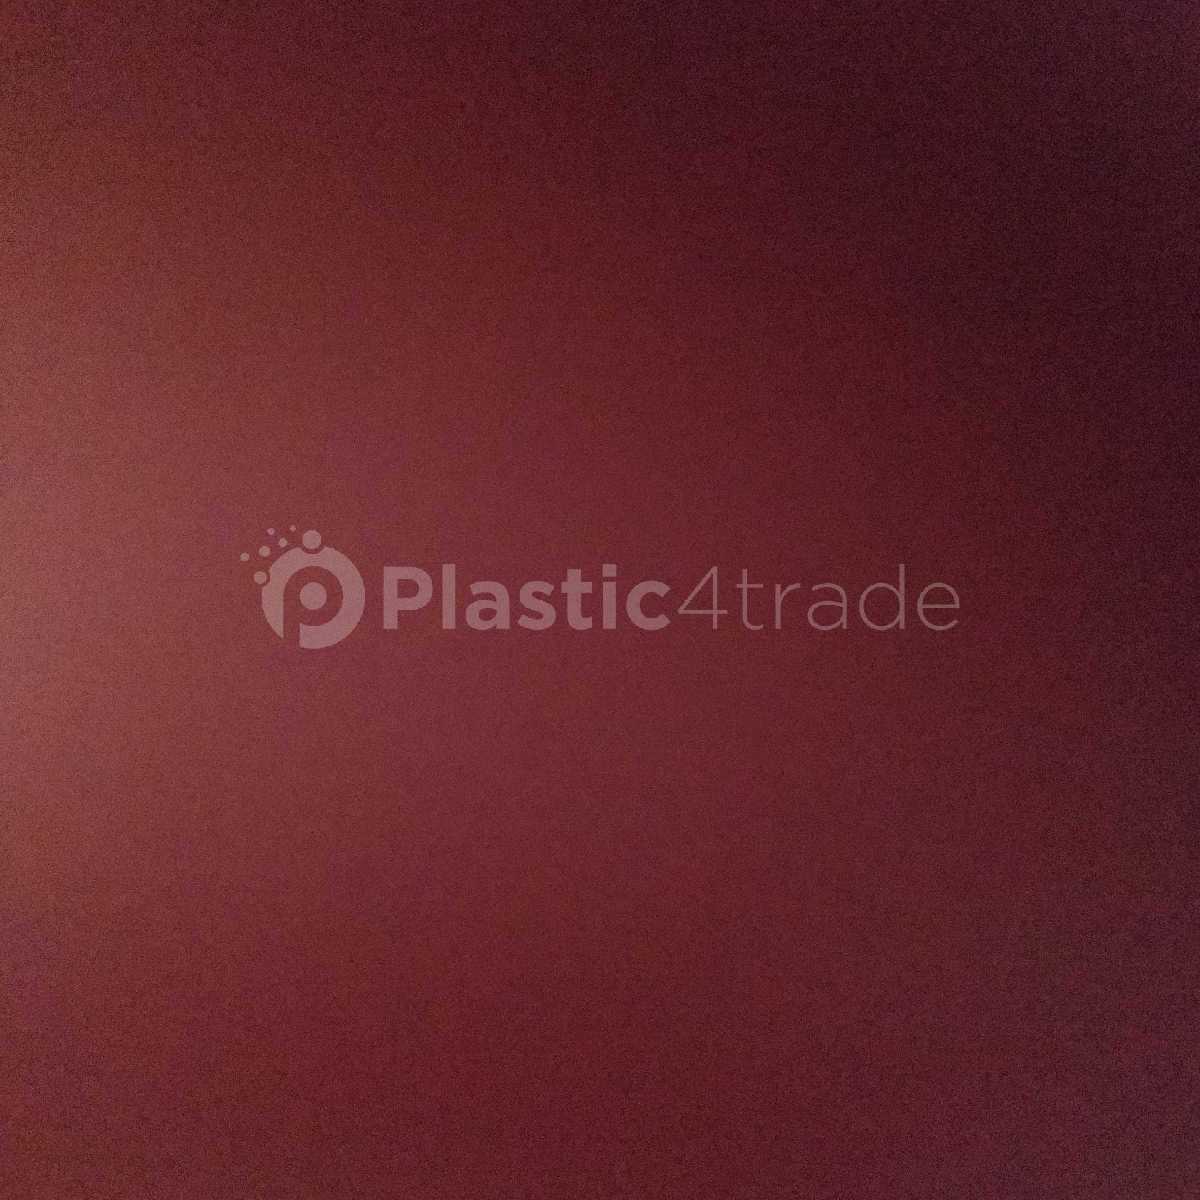 PLASTIC MACHINE AND BEVERAGES PLANT PP Prime/Virgin Injection Molding gujarat india Plastic4trade